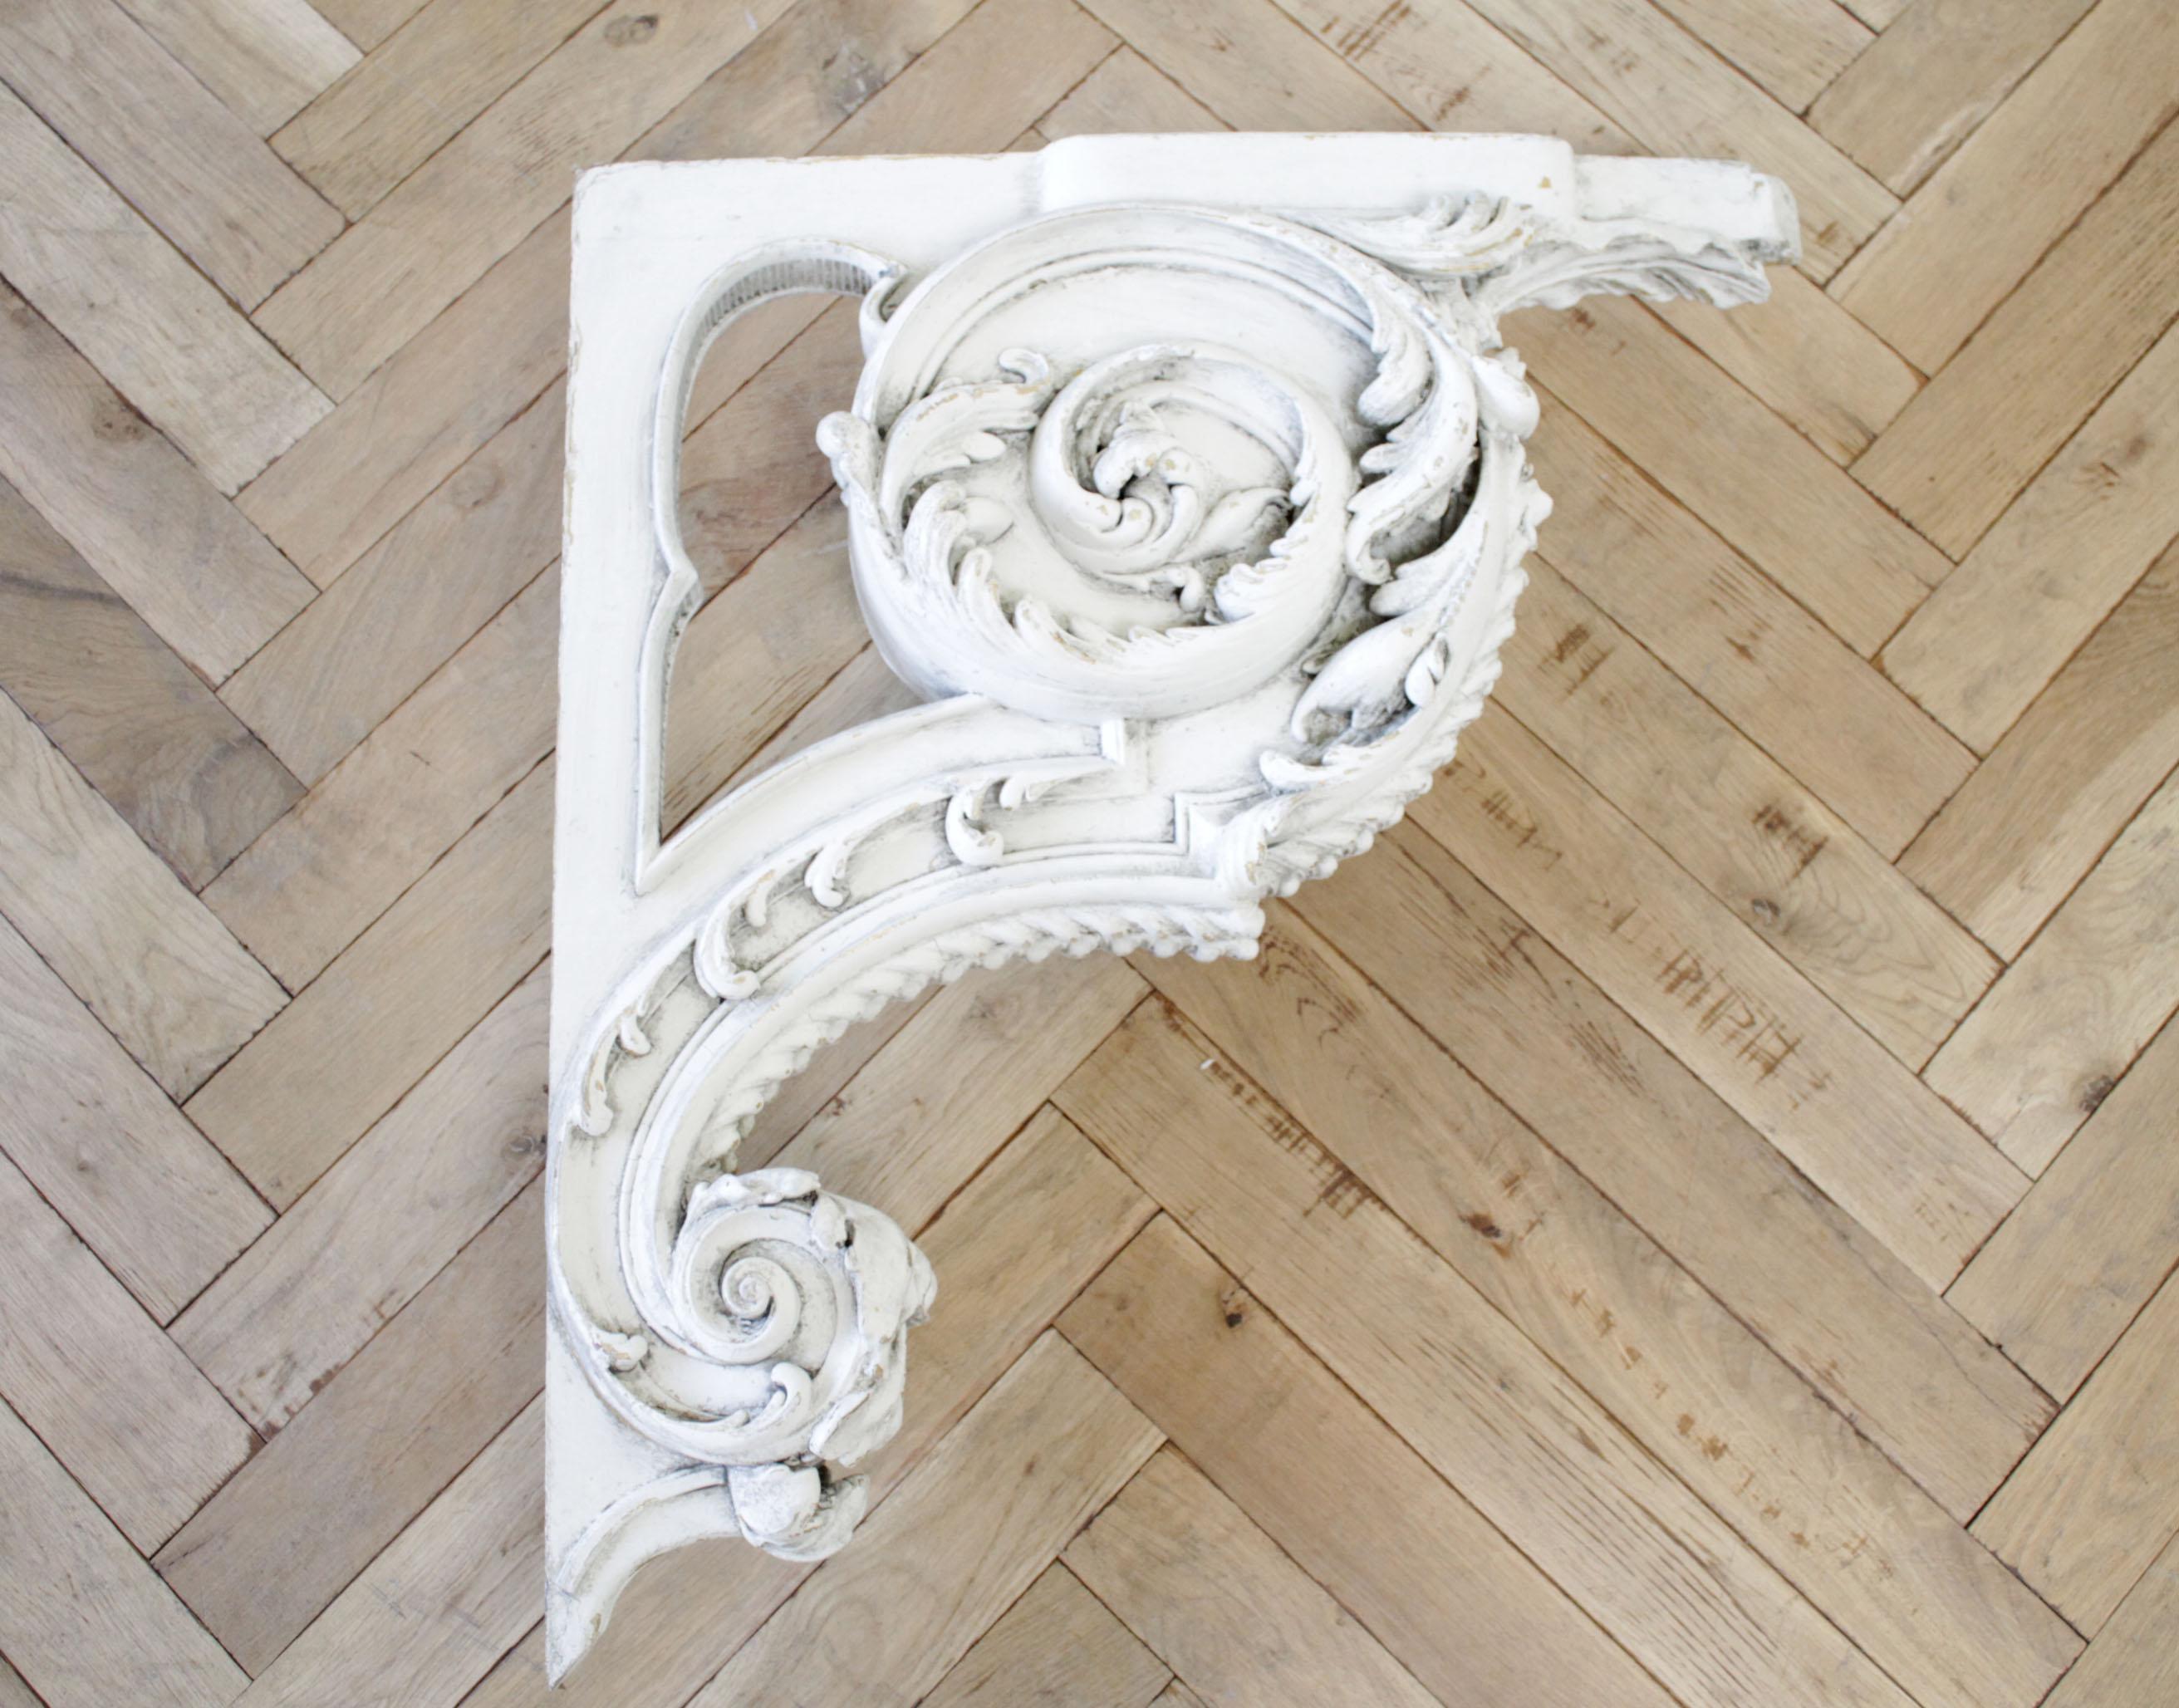 Antique Italian pair of carved architectural corbels
Wood, with gesso painted in an antique oyster white finish.
Measures: 8